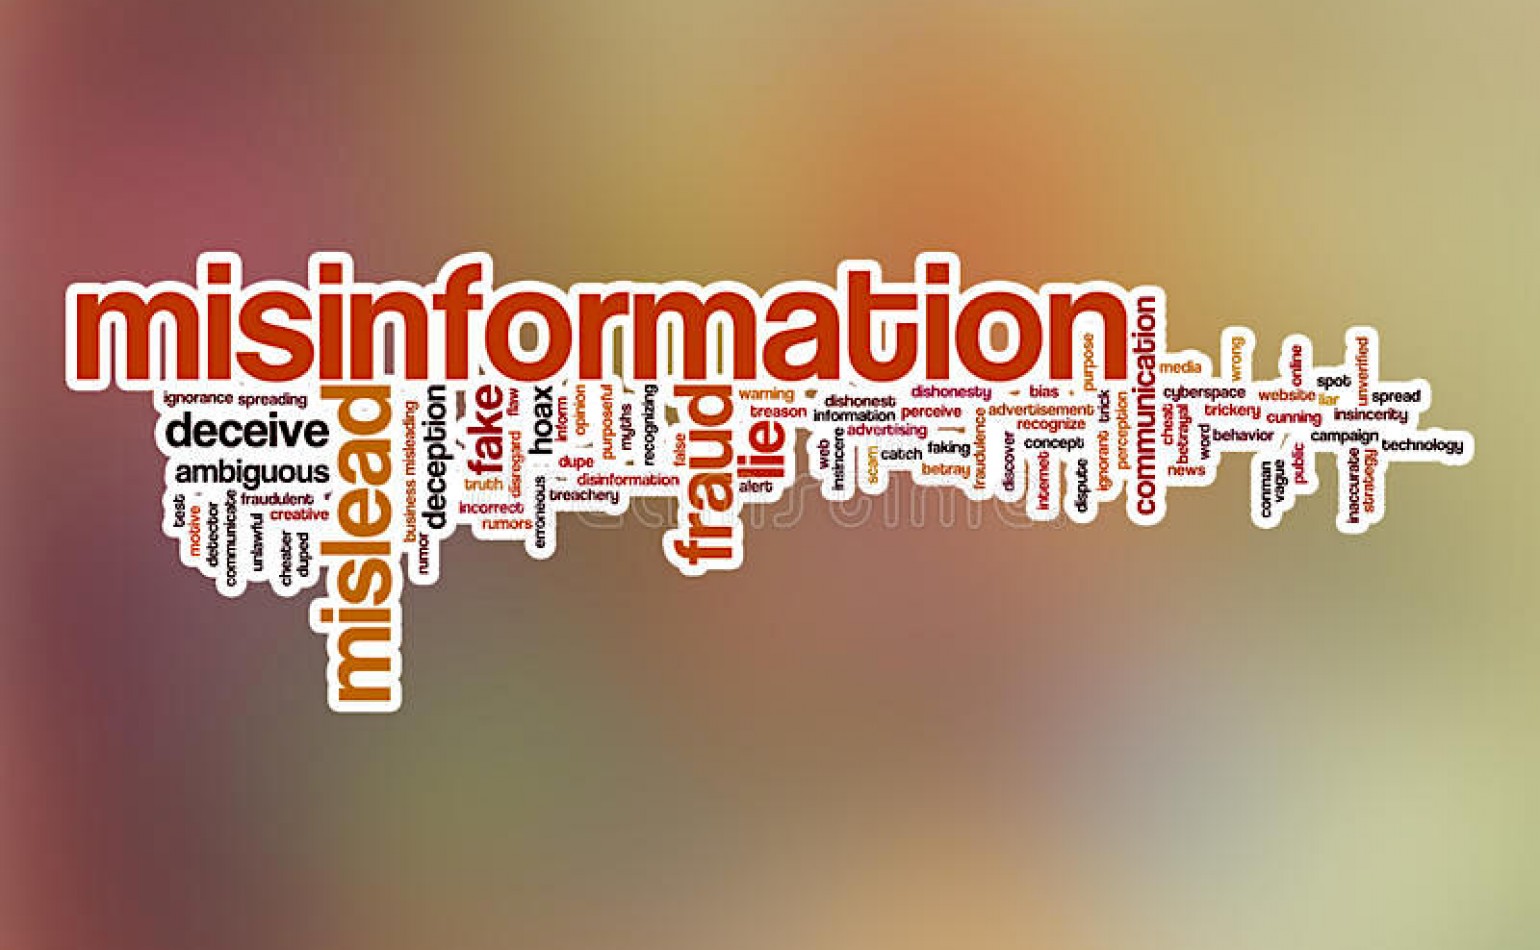 An open-letter to our fellow journalists and the Pakistani news media, to help push back on online misinformation and disinformation [which many of us refer to as fake news]